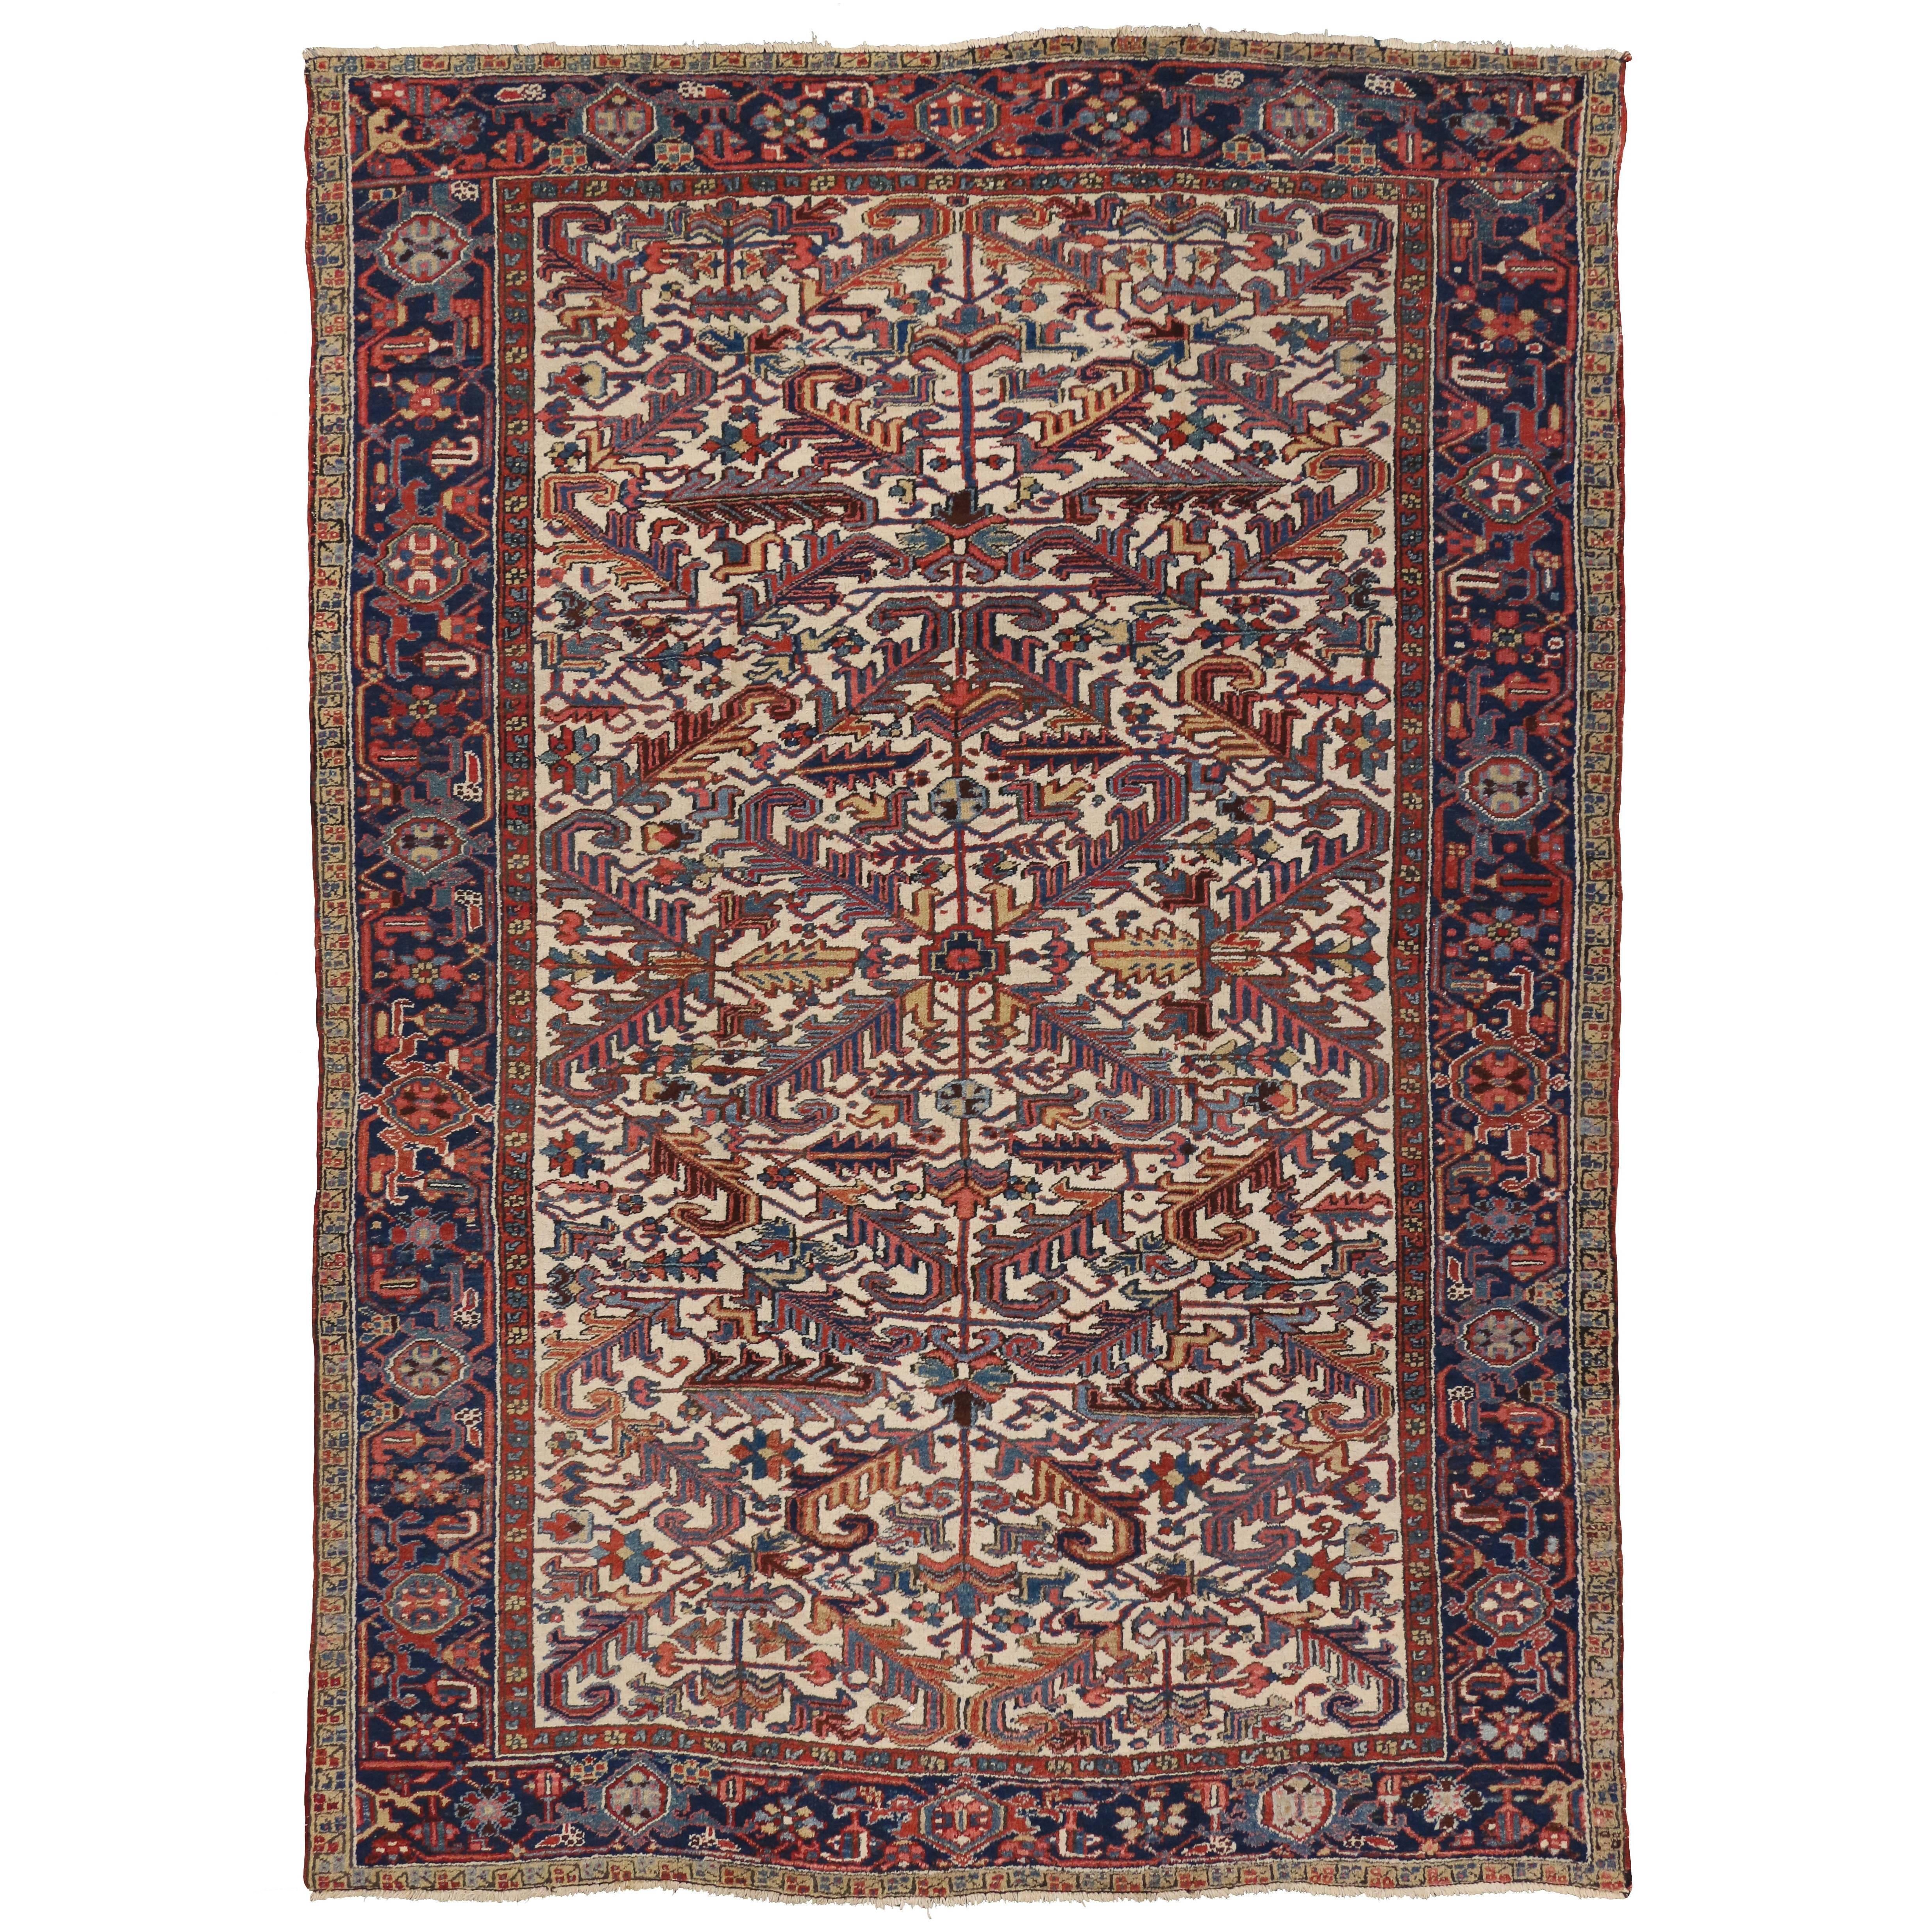 Antique Persian Heriz Rug with Modern Tribal Style